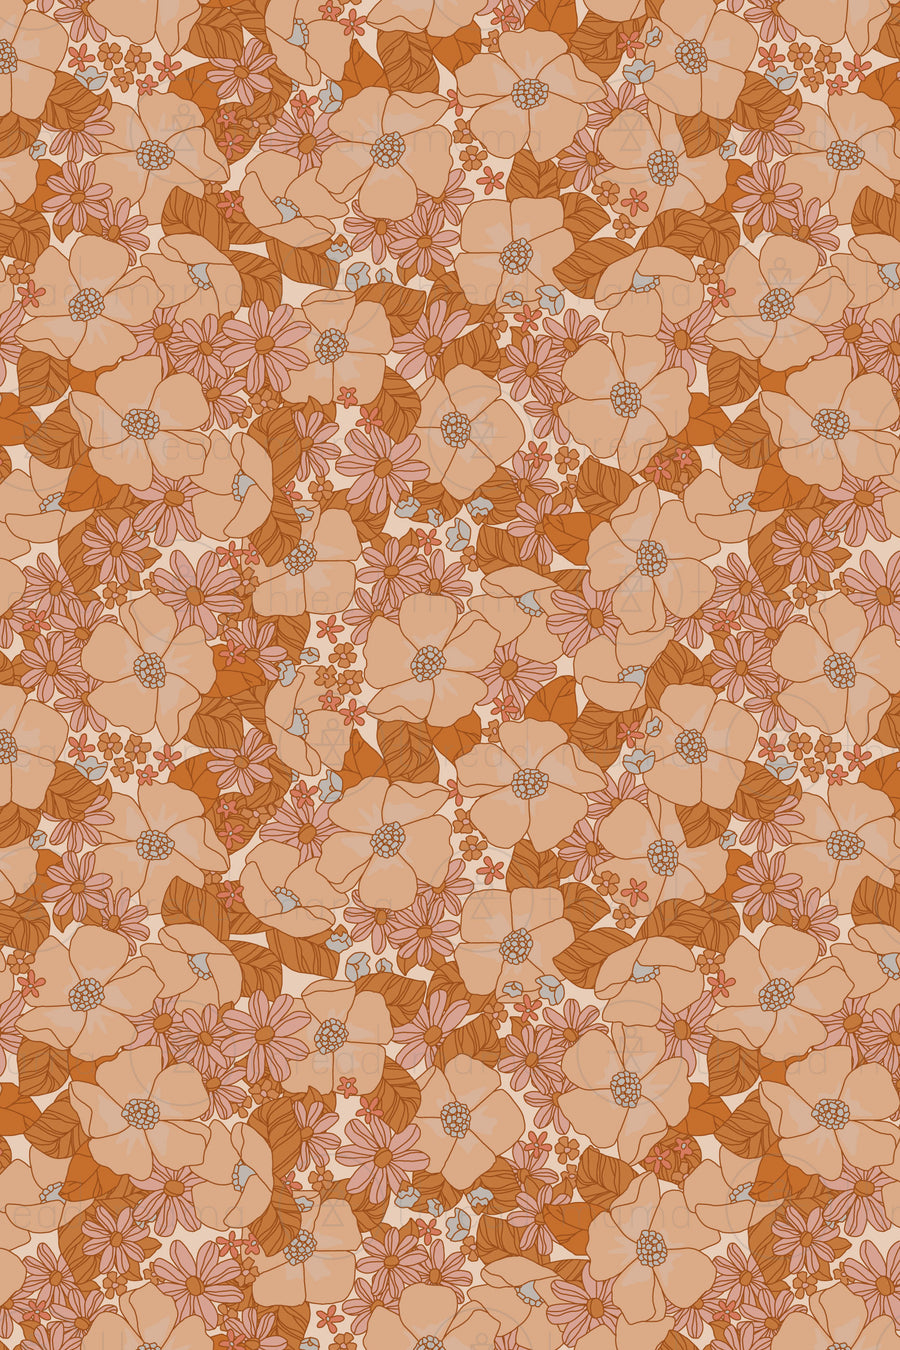 Repeating Pattern 222 (Seamless)